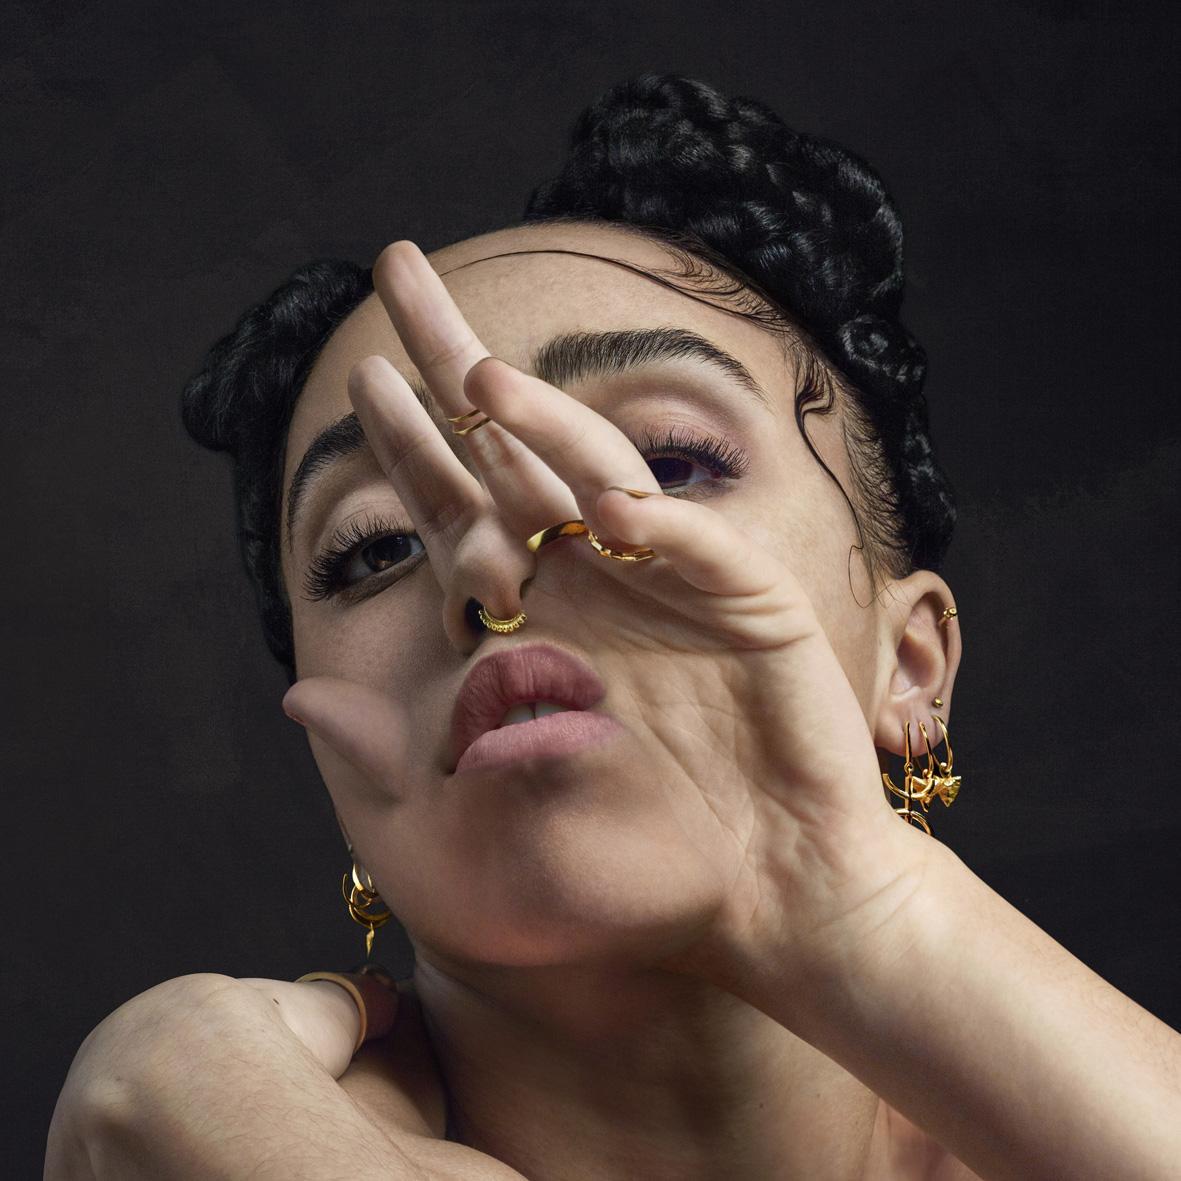 FKA twigs surprise releases M3LL155X EP with four videos